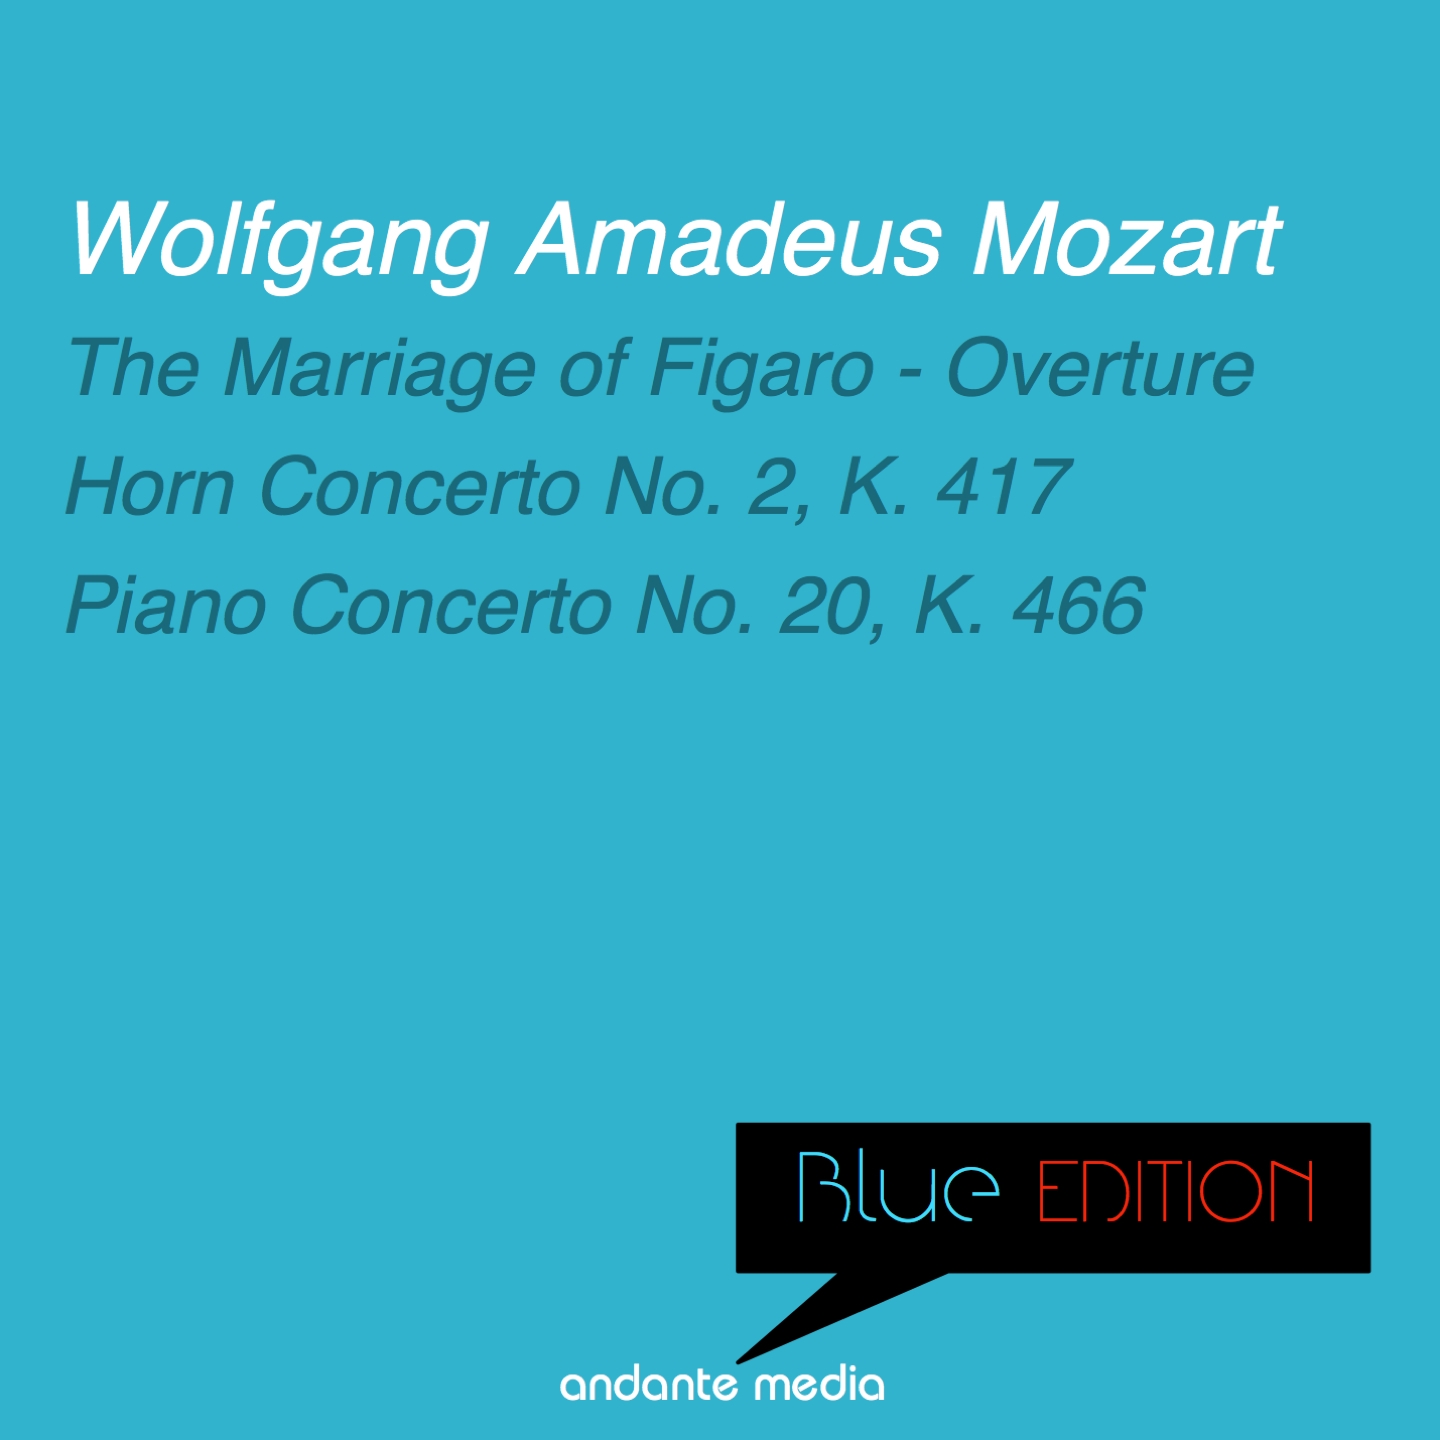 Quintet for Piano and Winds in E-Flat Major, K. 452: III. Allegretto